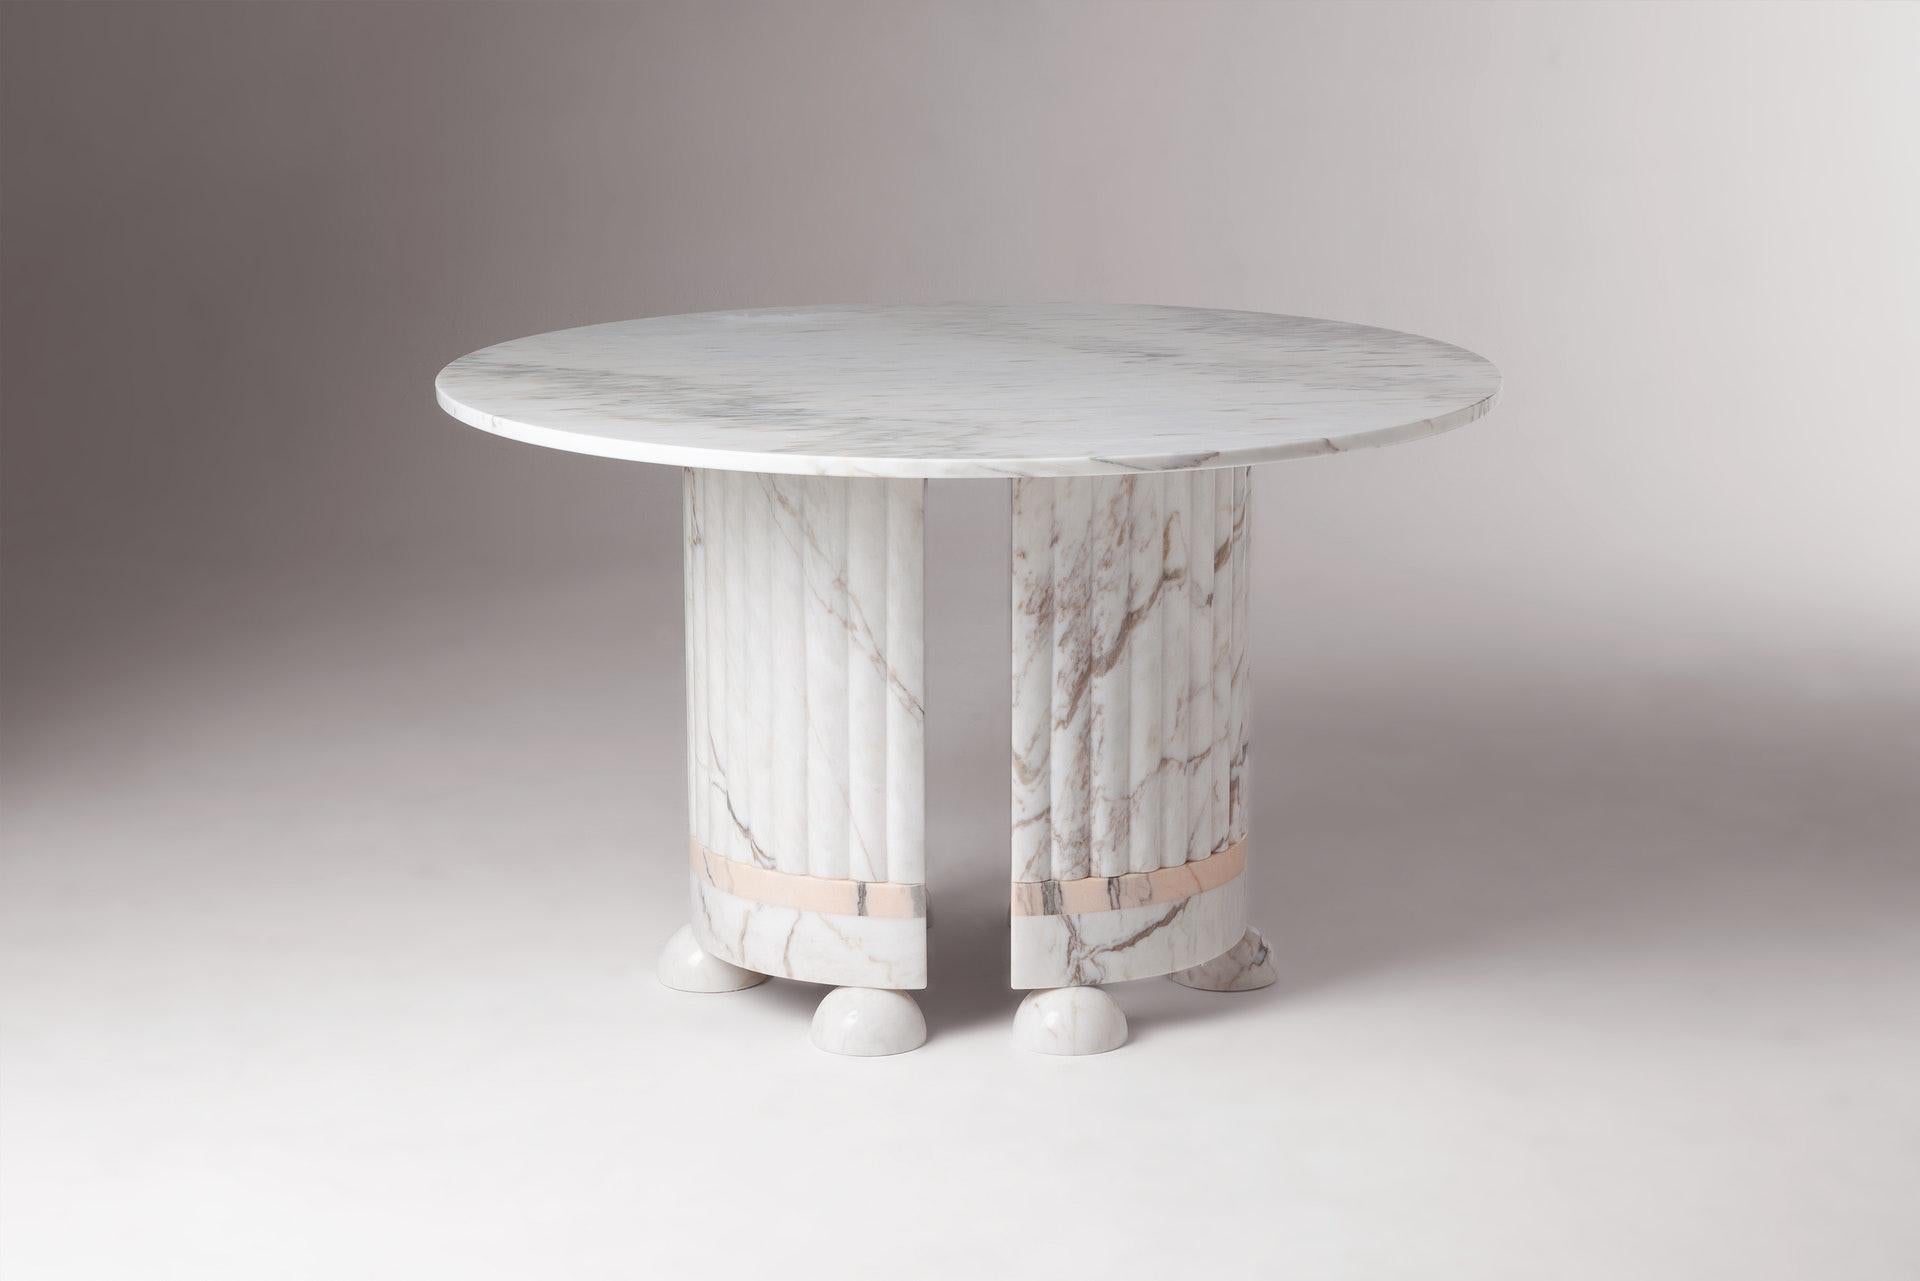 A dining table designed to question the sometimes imposed 